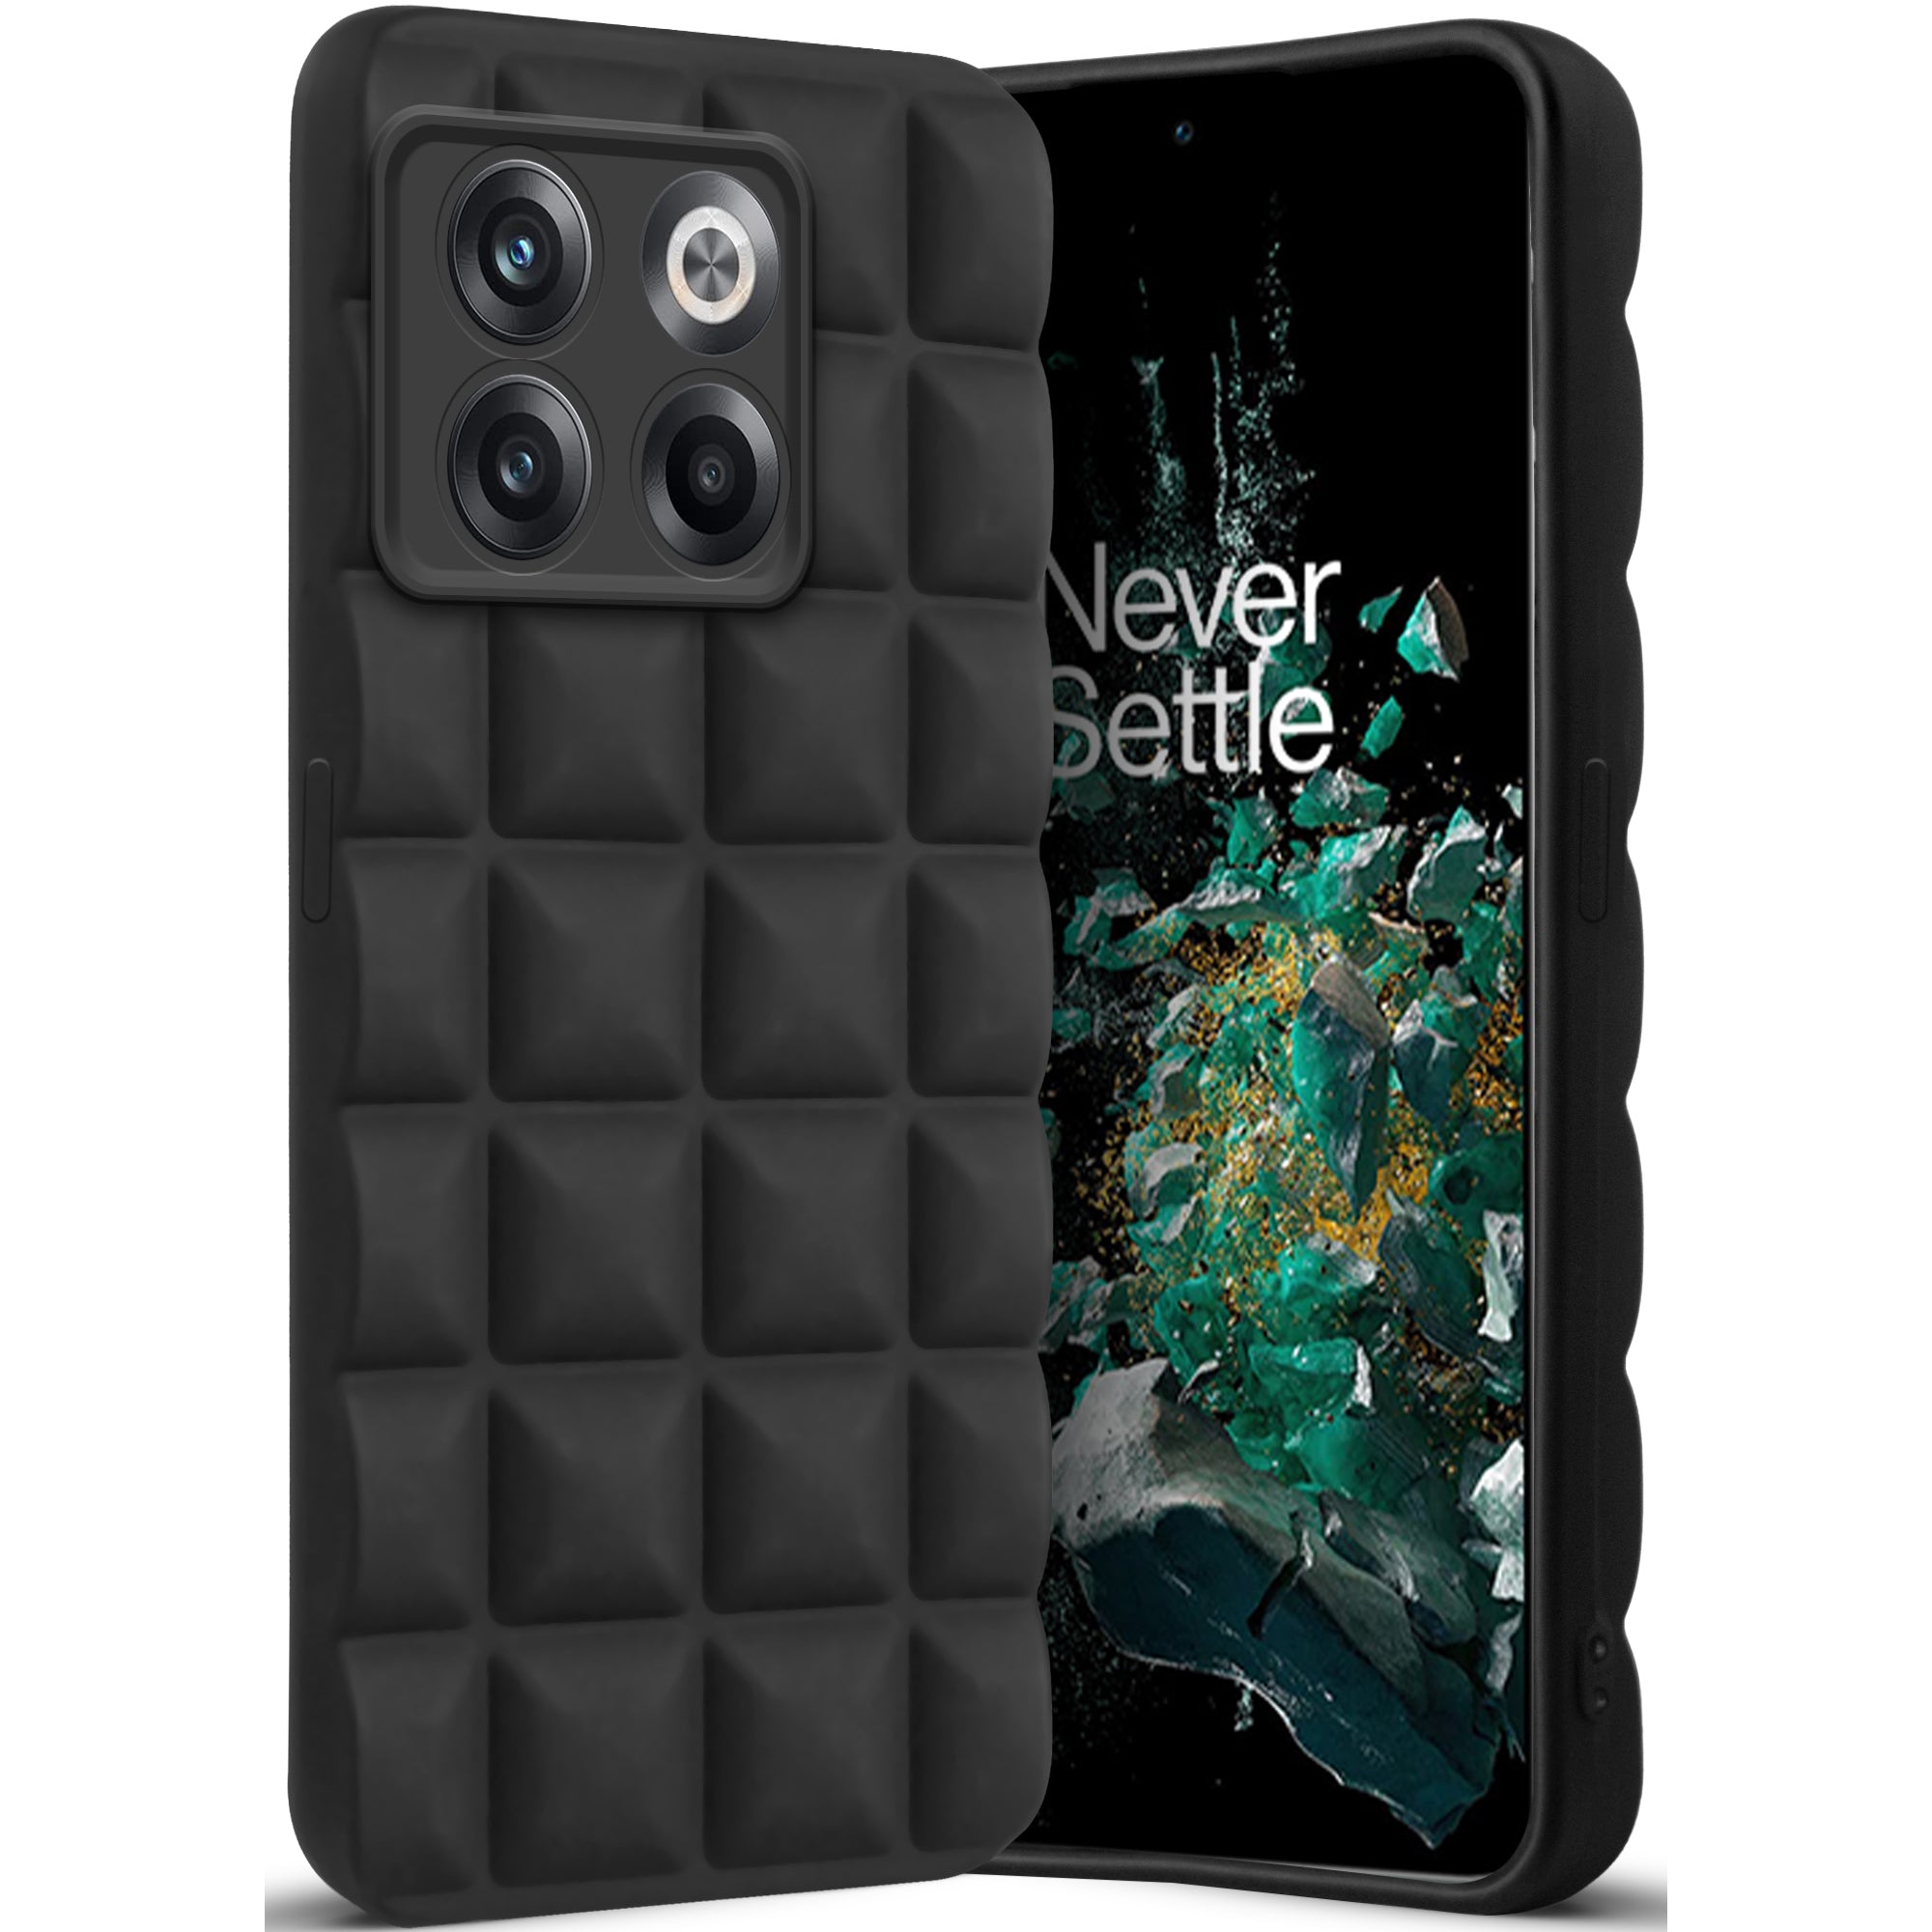 3D Grid Matte Silicone Phone Case Cover for OnePlus 10T 5G